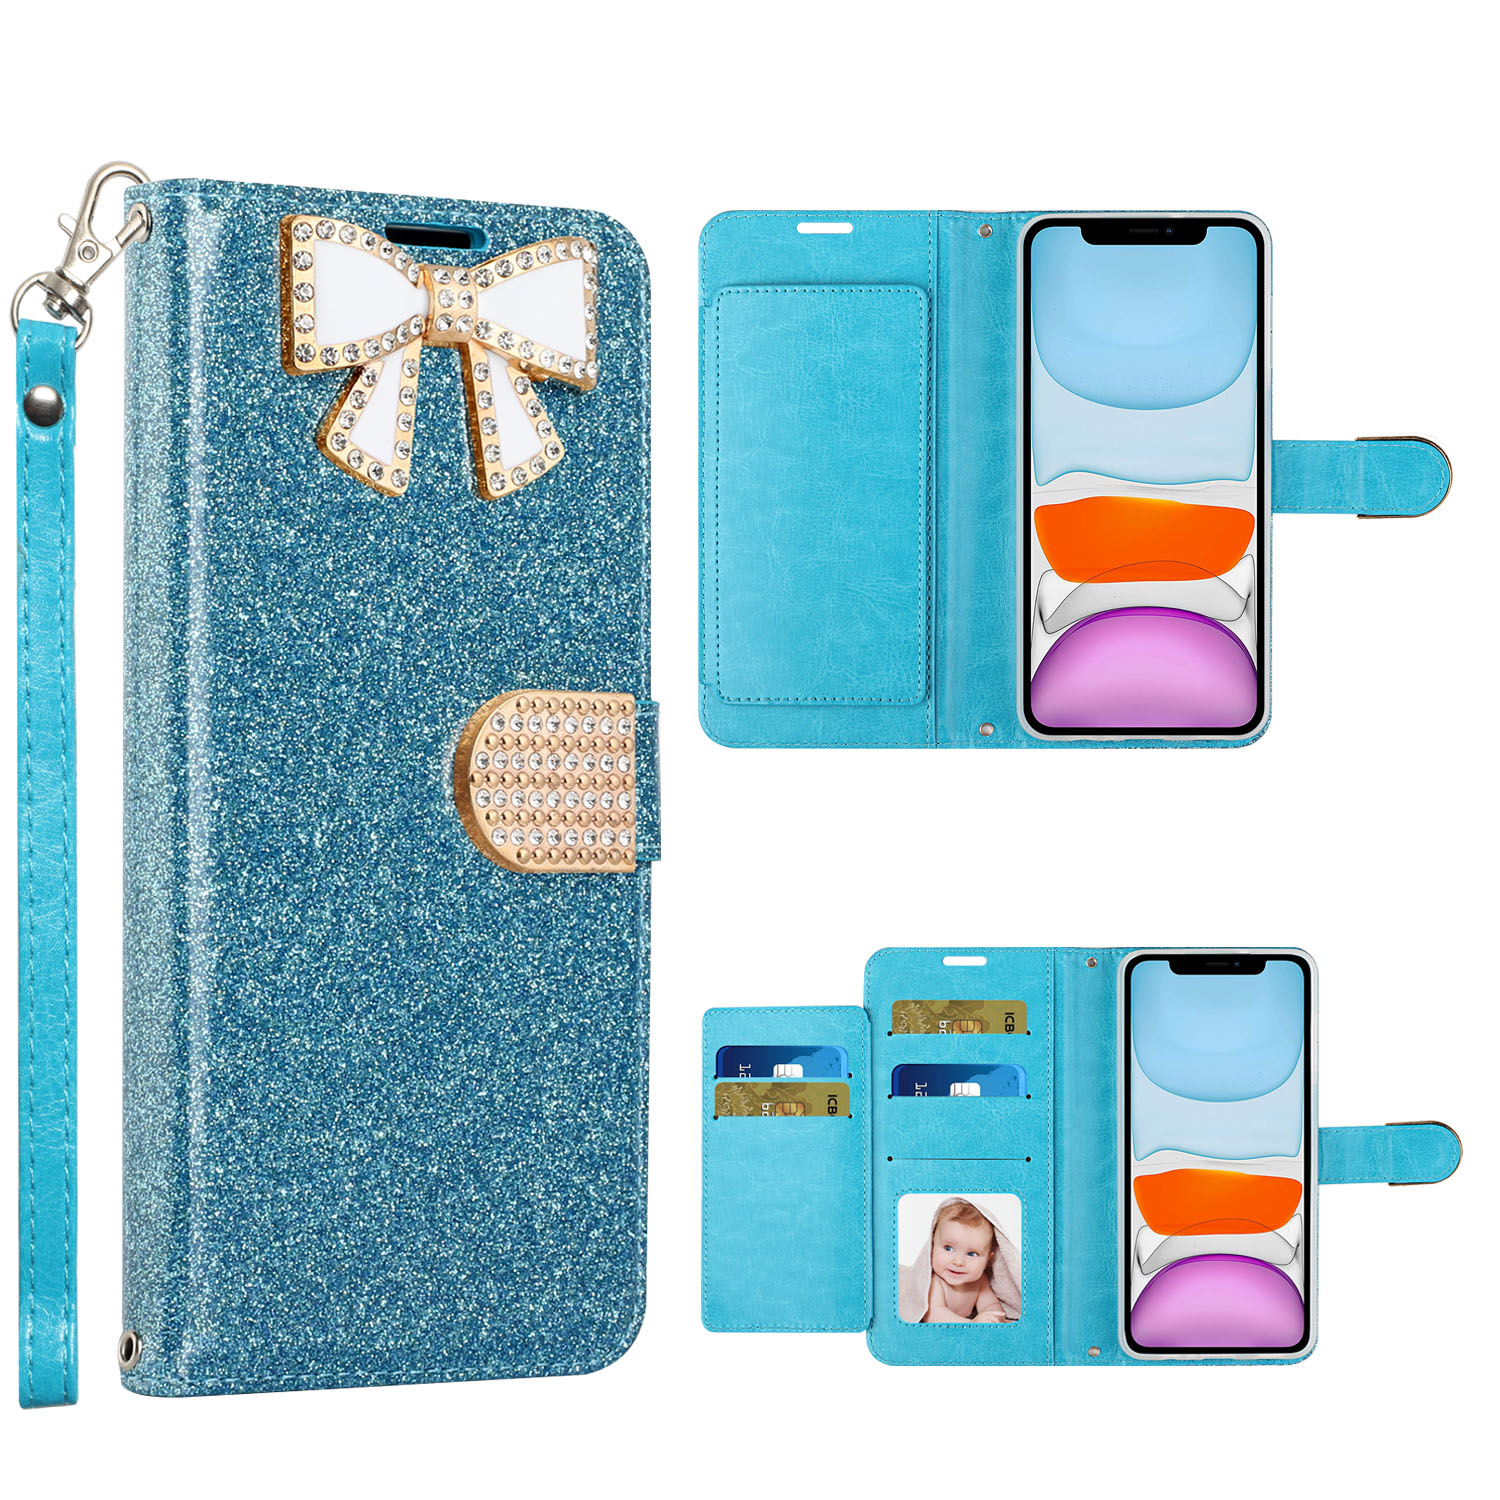 Ribbon Bow Crystal Diamond WALLET Case for Apple iPhone 11 [6.1] (Light Blue)